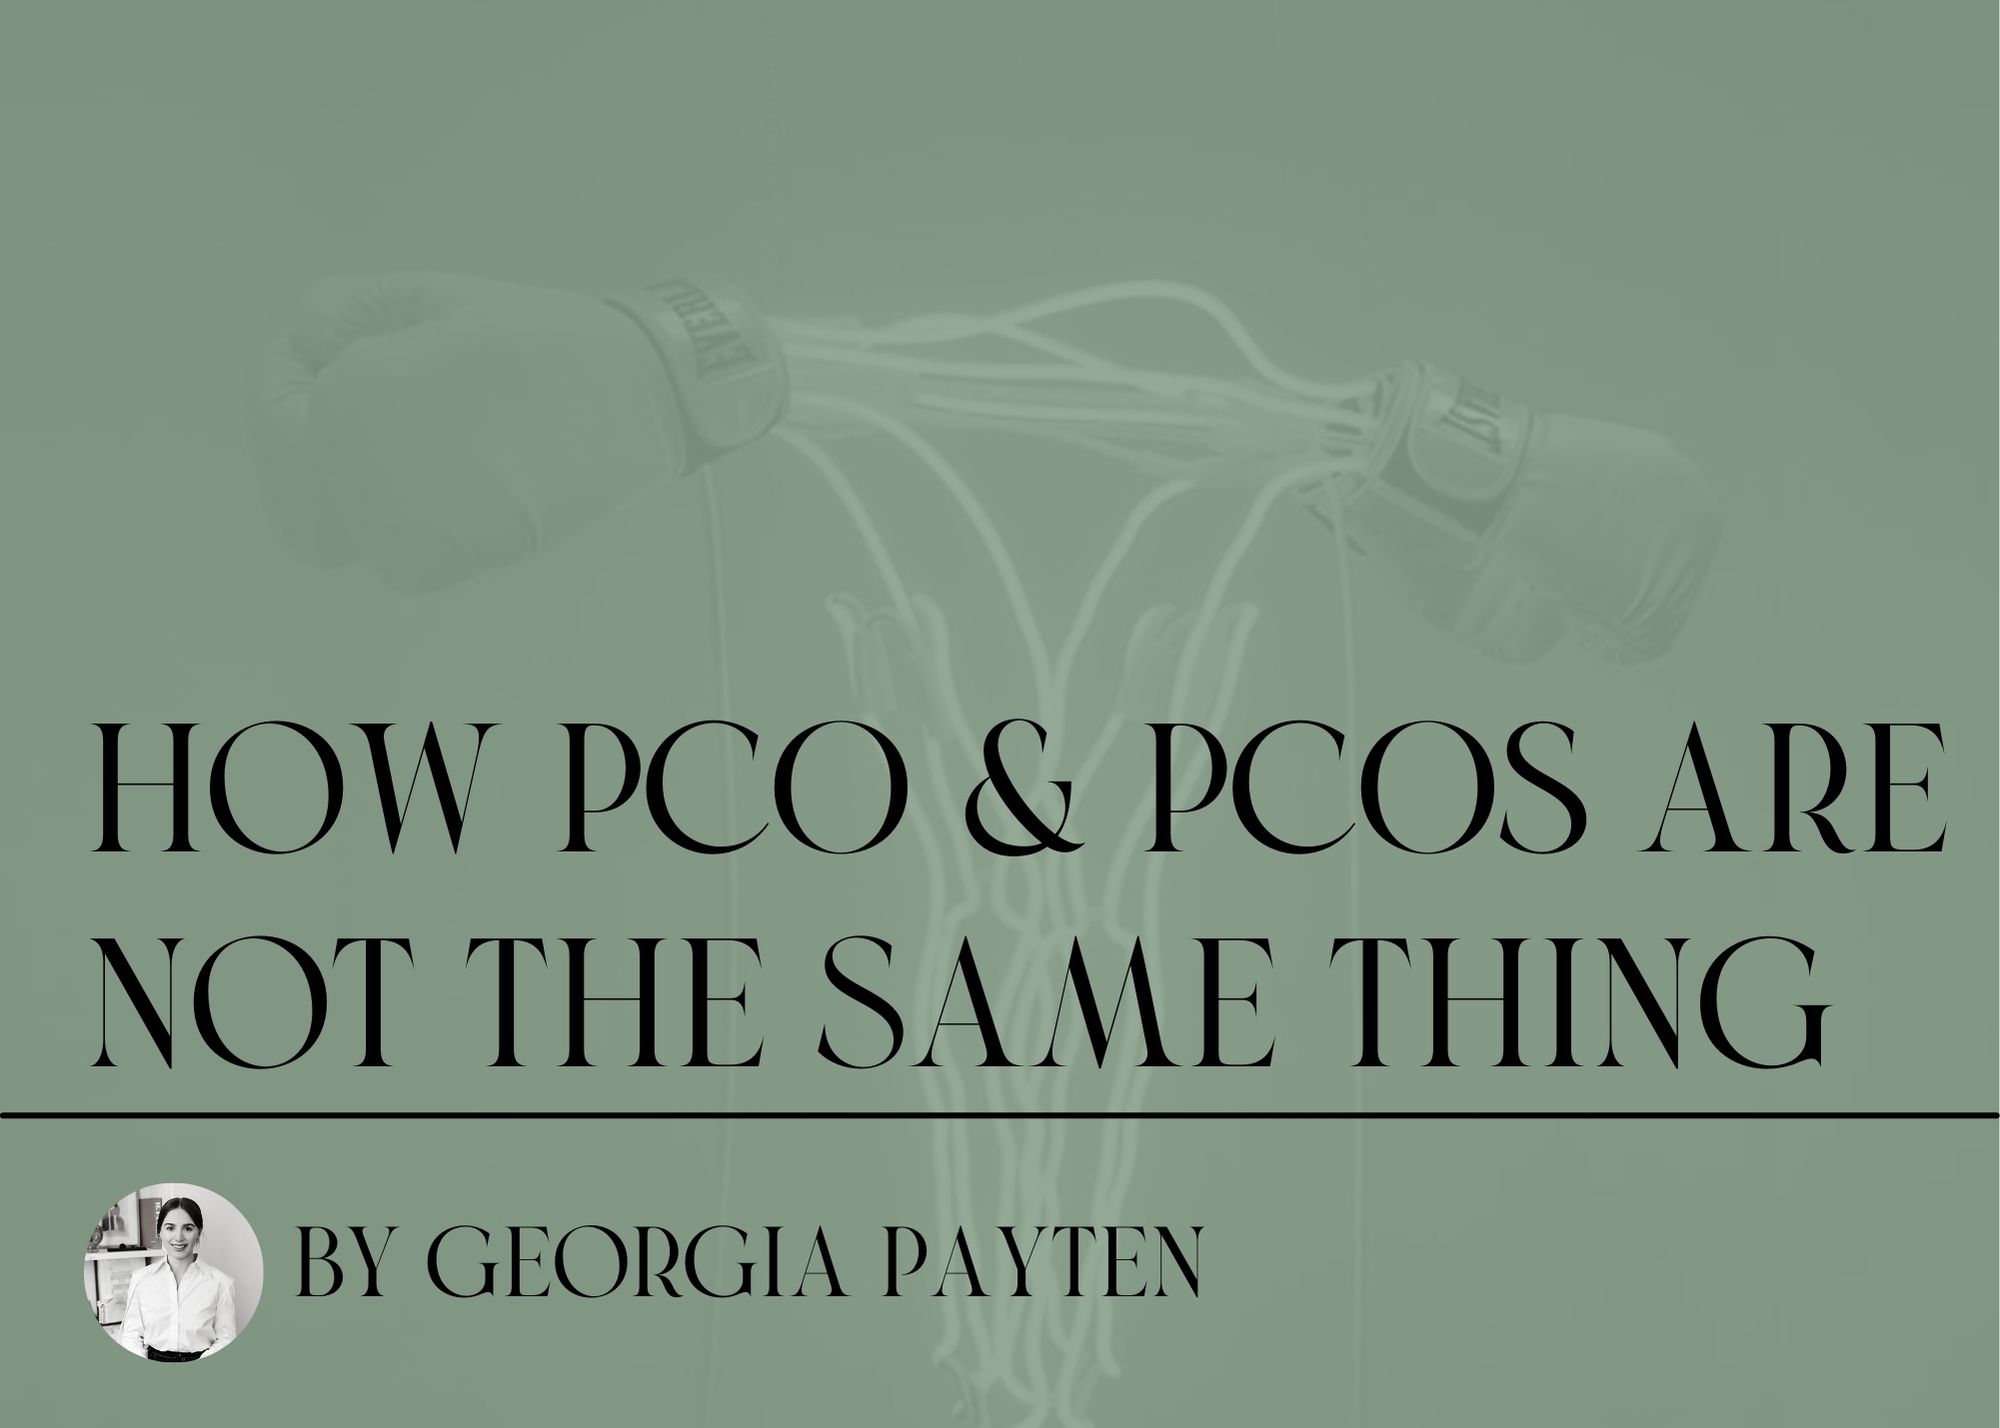 How PCO & PCOS are not the same thing ~